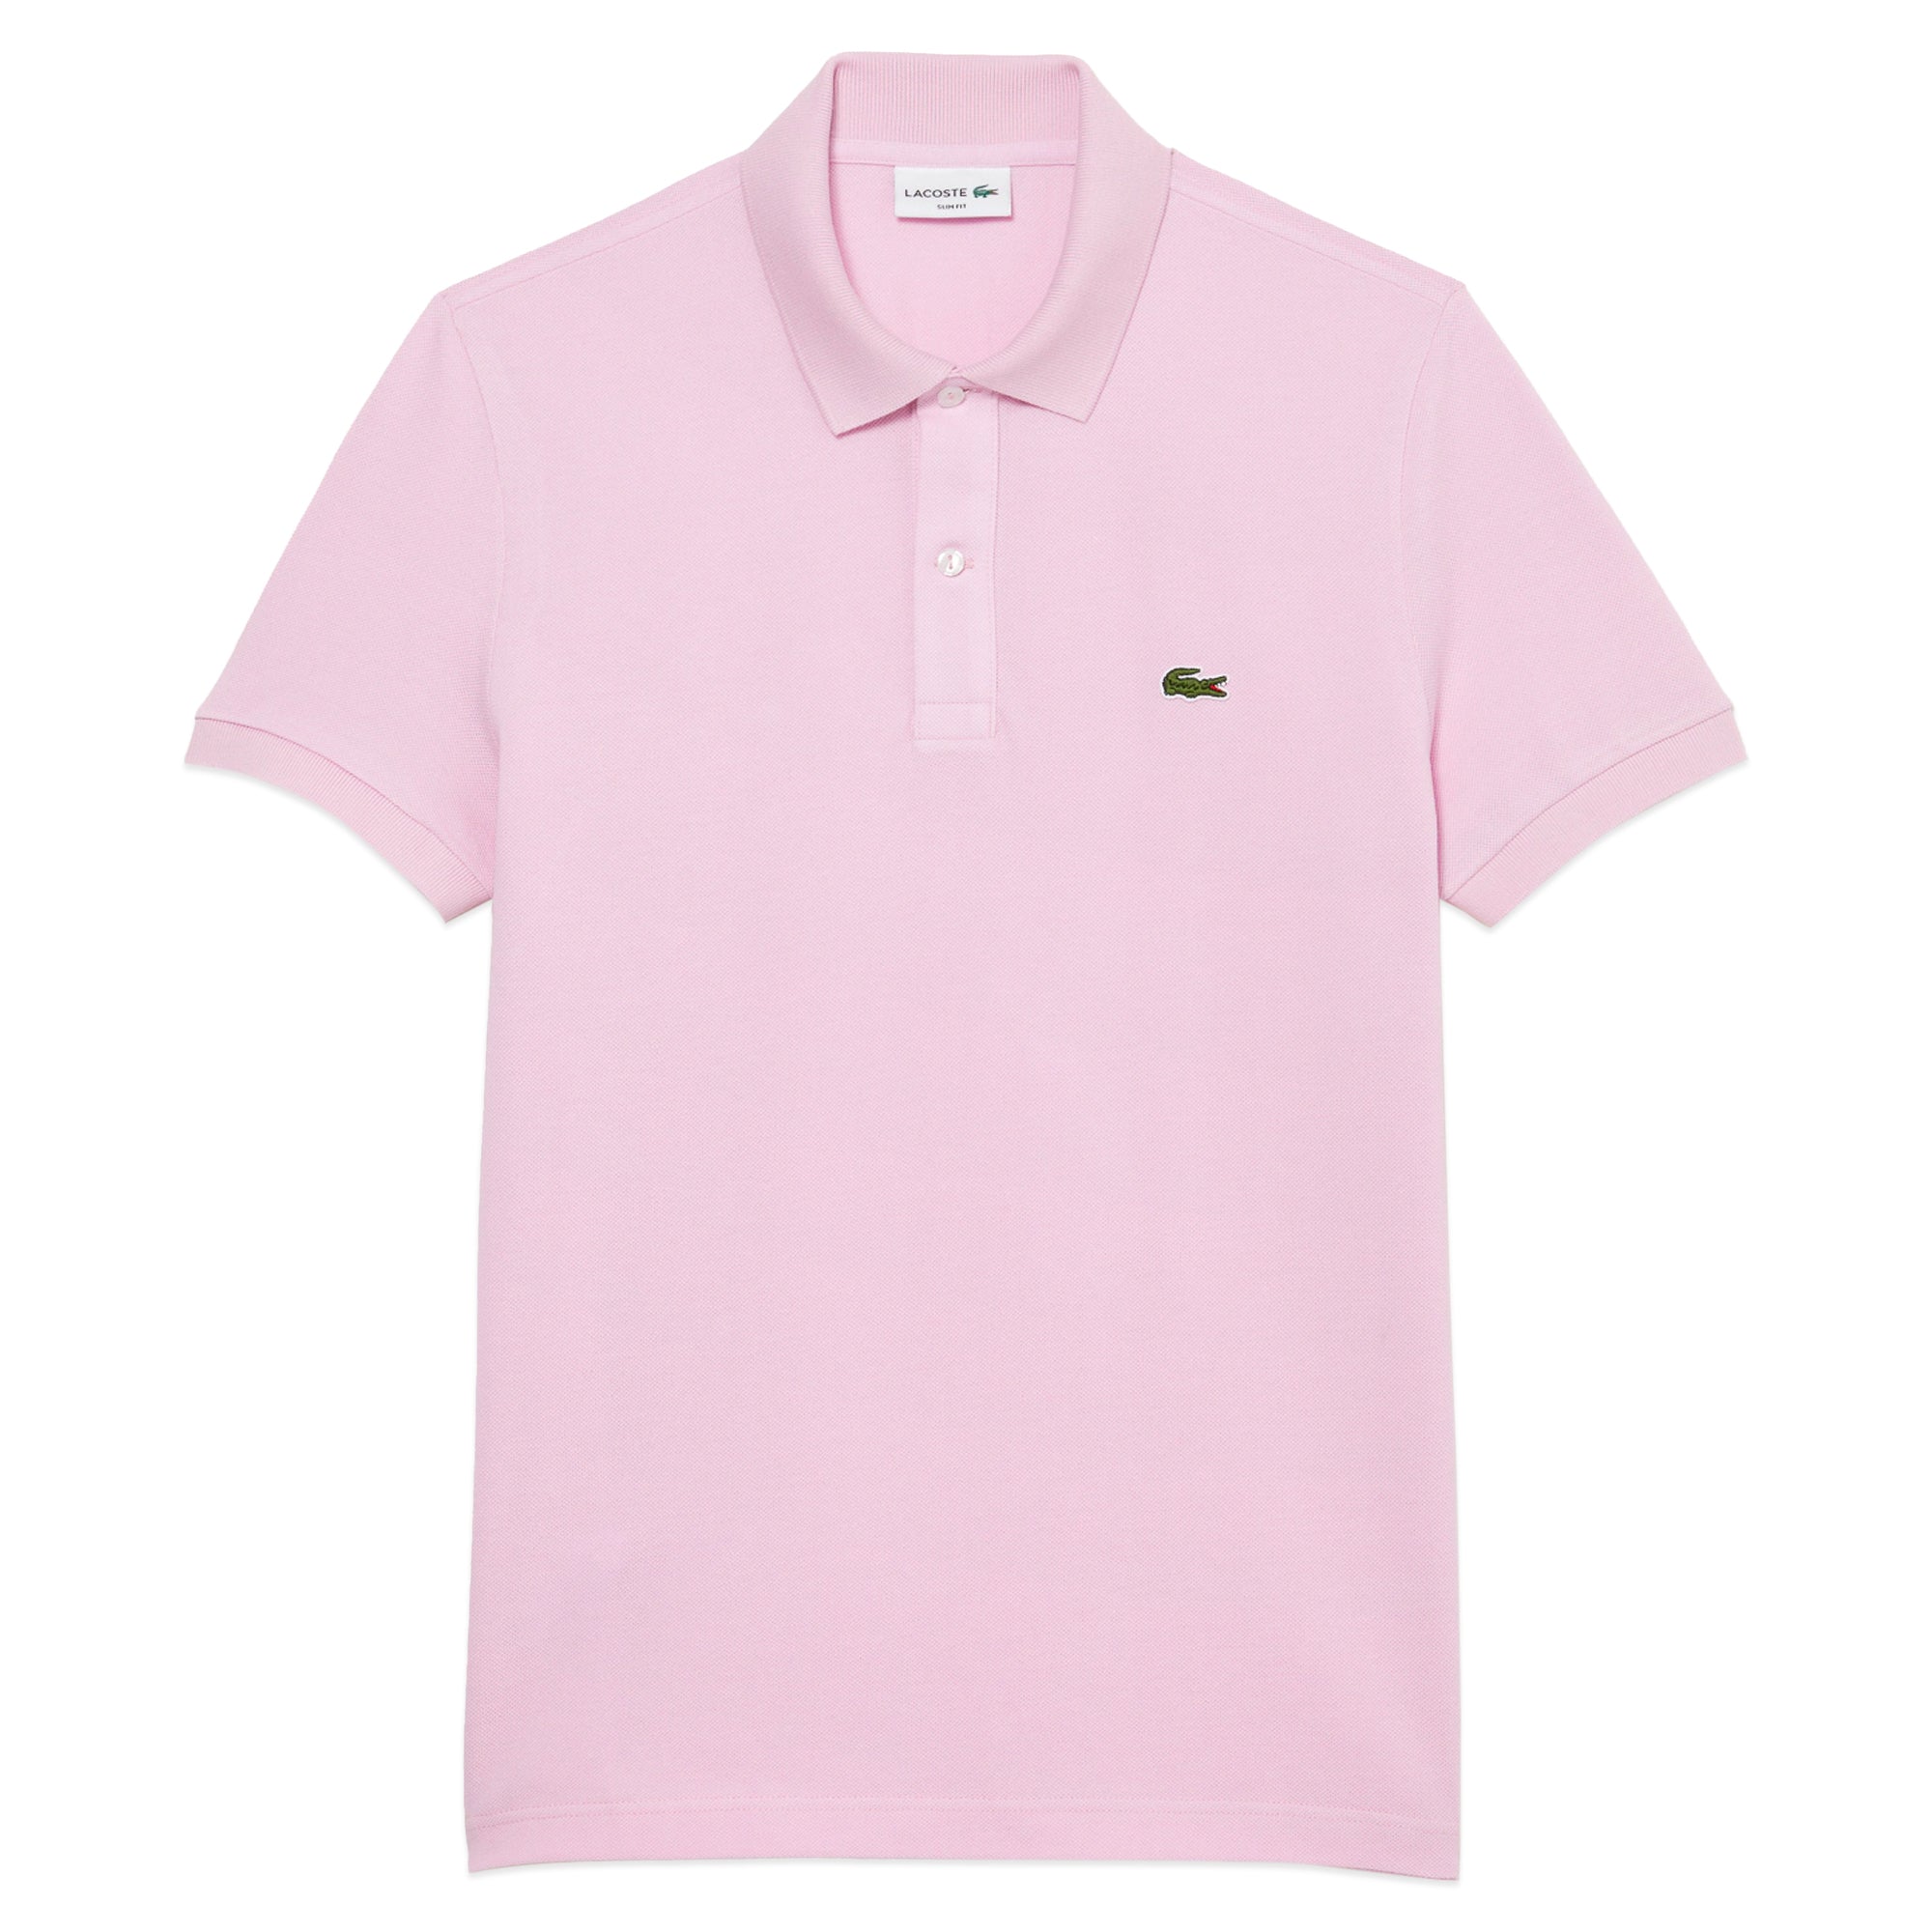 Lacoste Short Sleeved Slim Fit Polo PH4012 - Albizia Pink